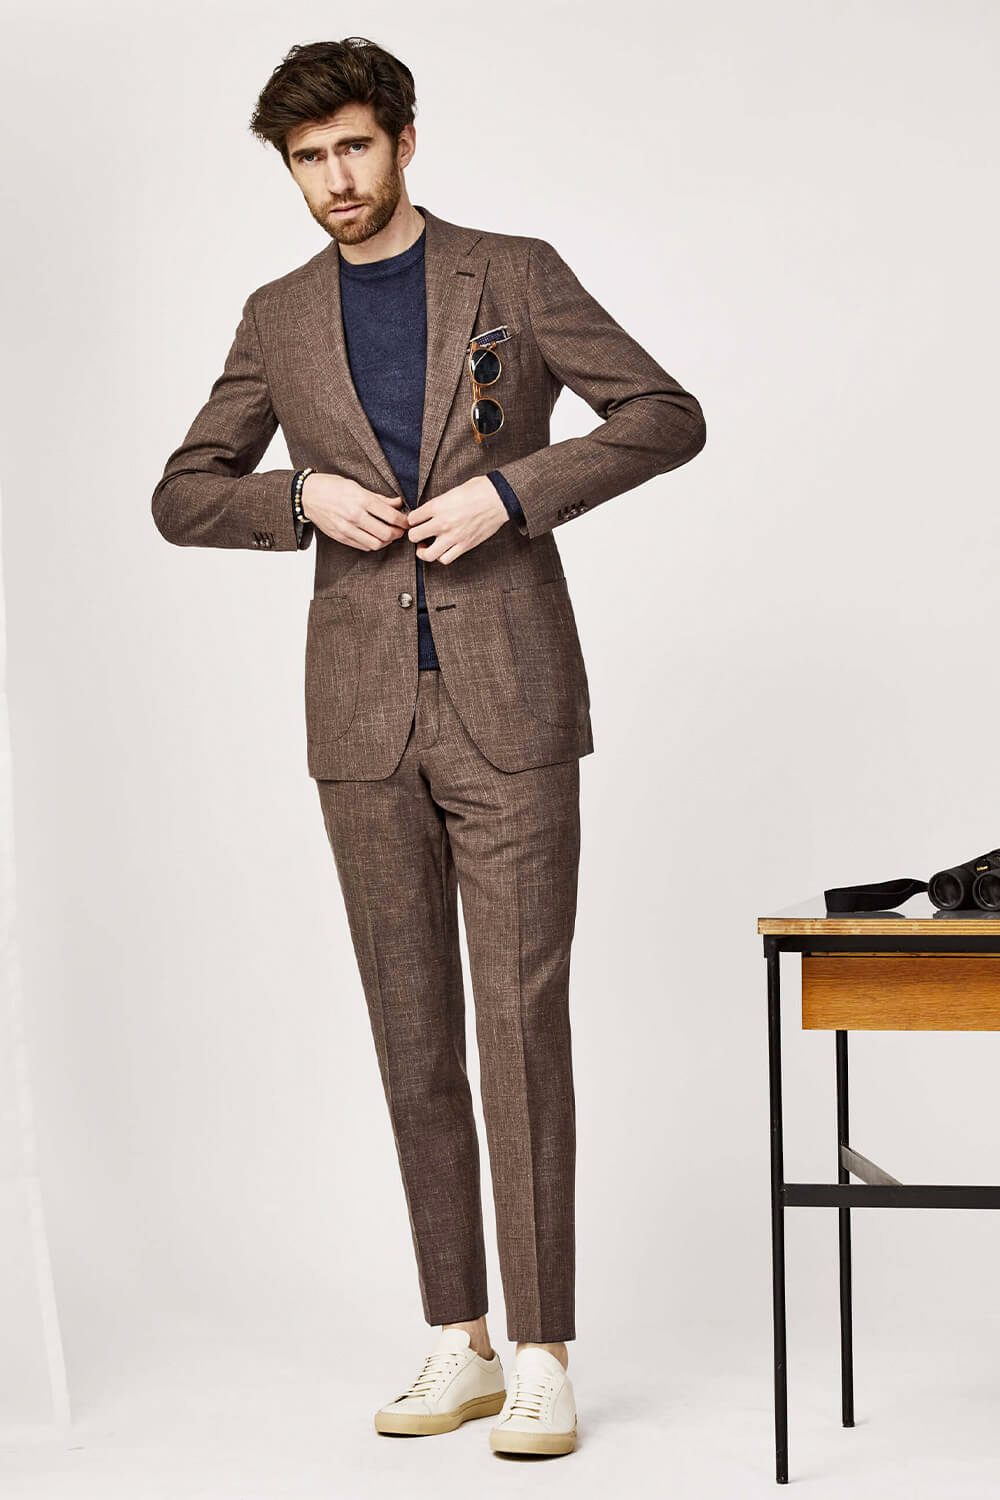 brown linen suit, navy t-shirt, and white sneakers